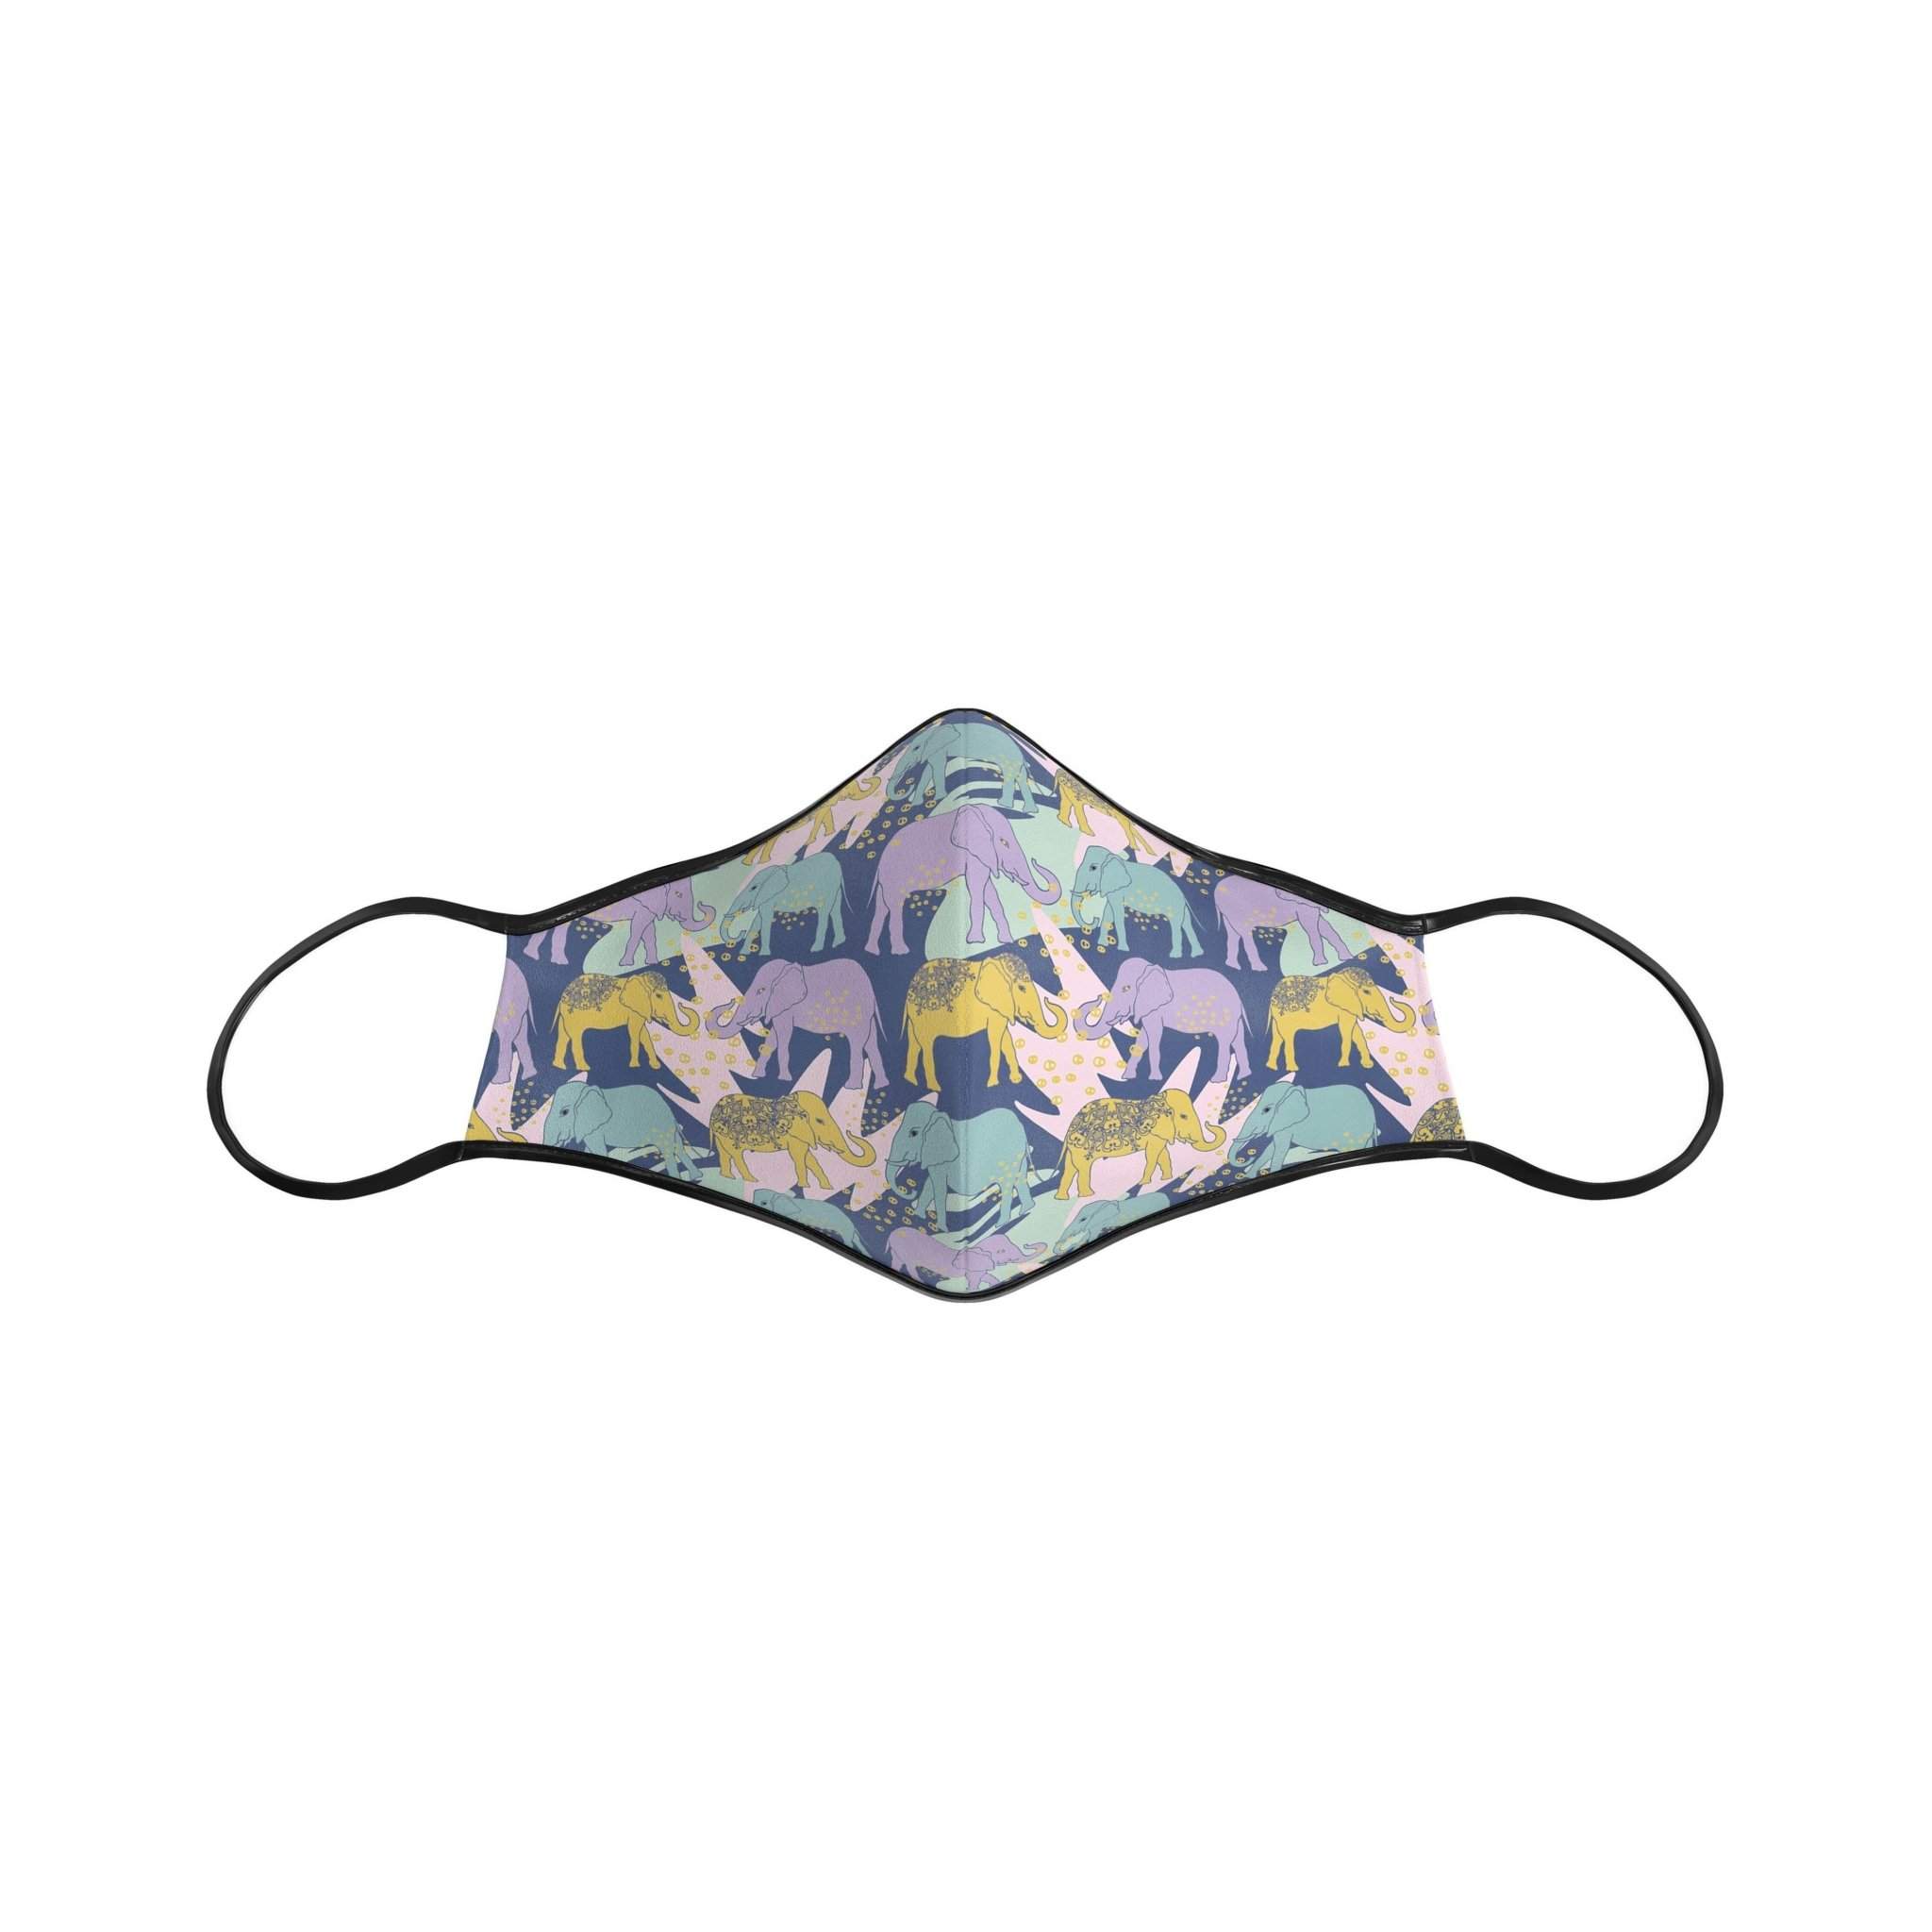 FACE MASK - Purple Elepanta Face Masks - Buy Today Elephant Pants Jewelry And Bohemian Clothes Handmade In Thailand Help To Save The Elephants FairTrade And Vegan